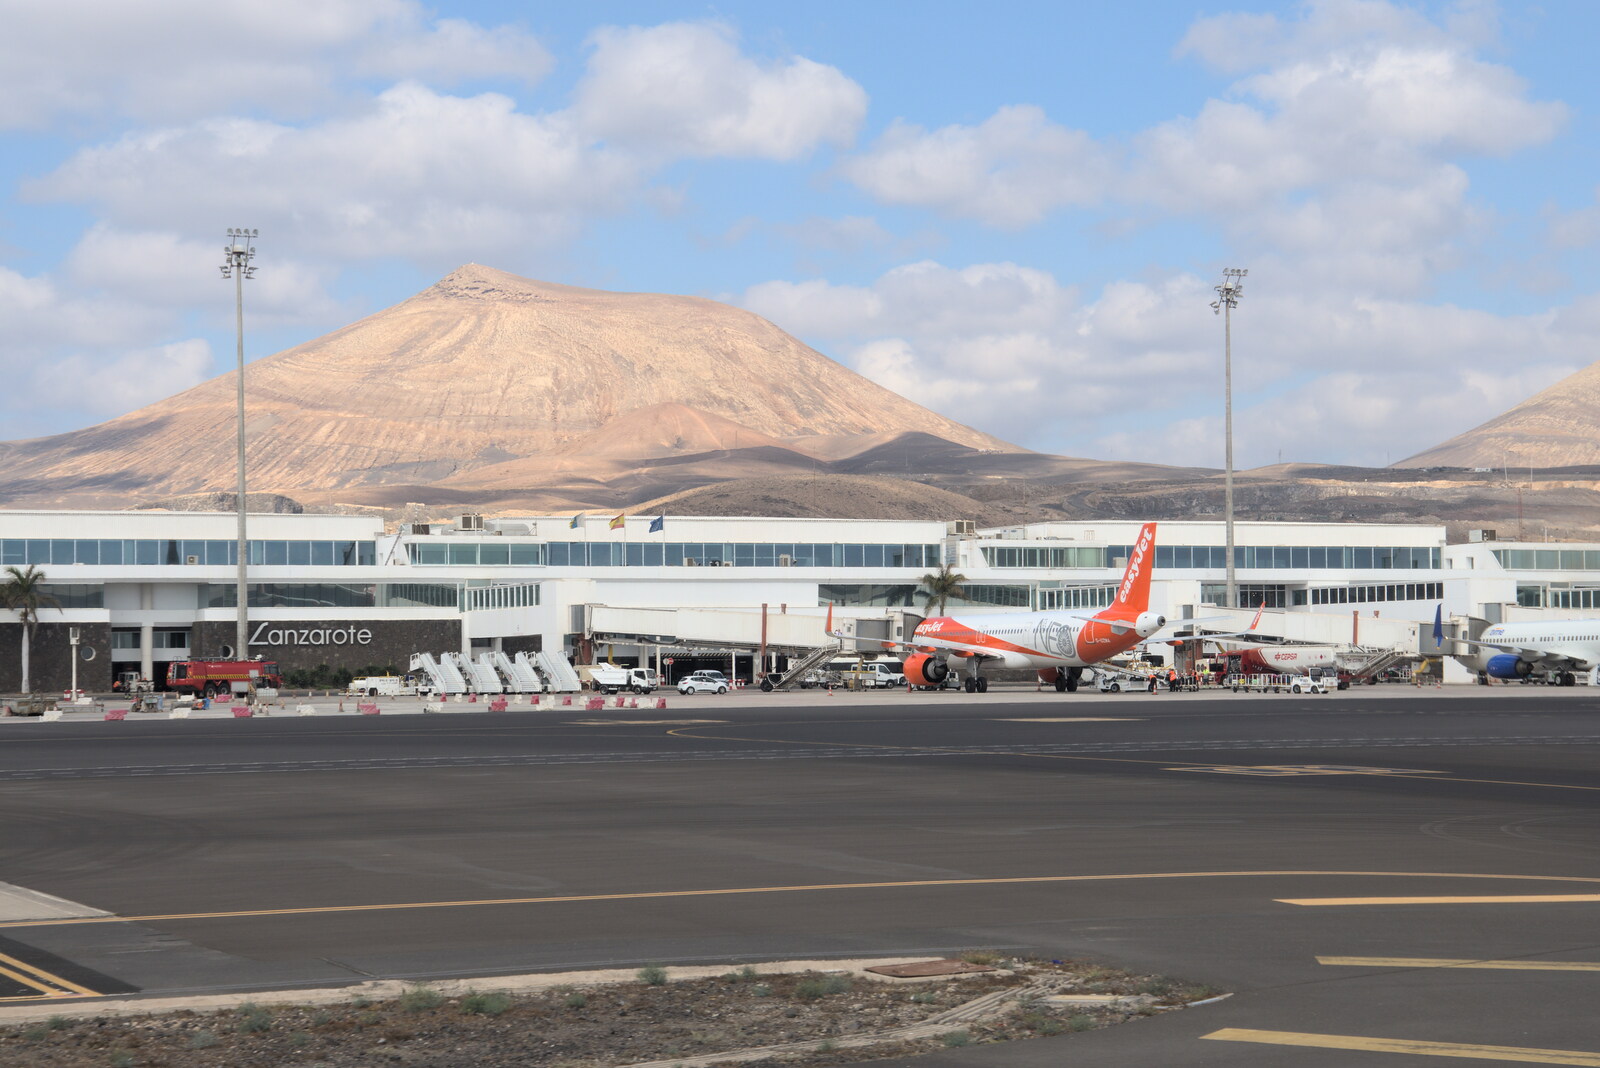 Volcanoes behind the airport from The Volcanoes of Lanzarote, Canary Islands, Spain - 27th October 2021